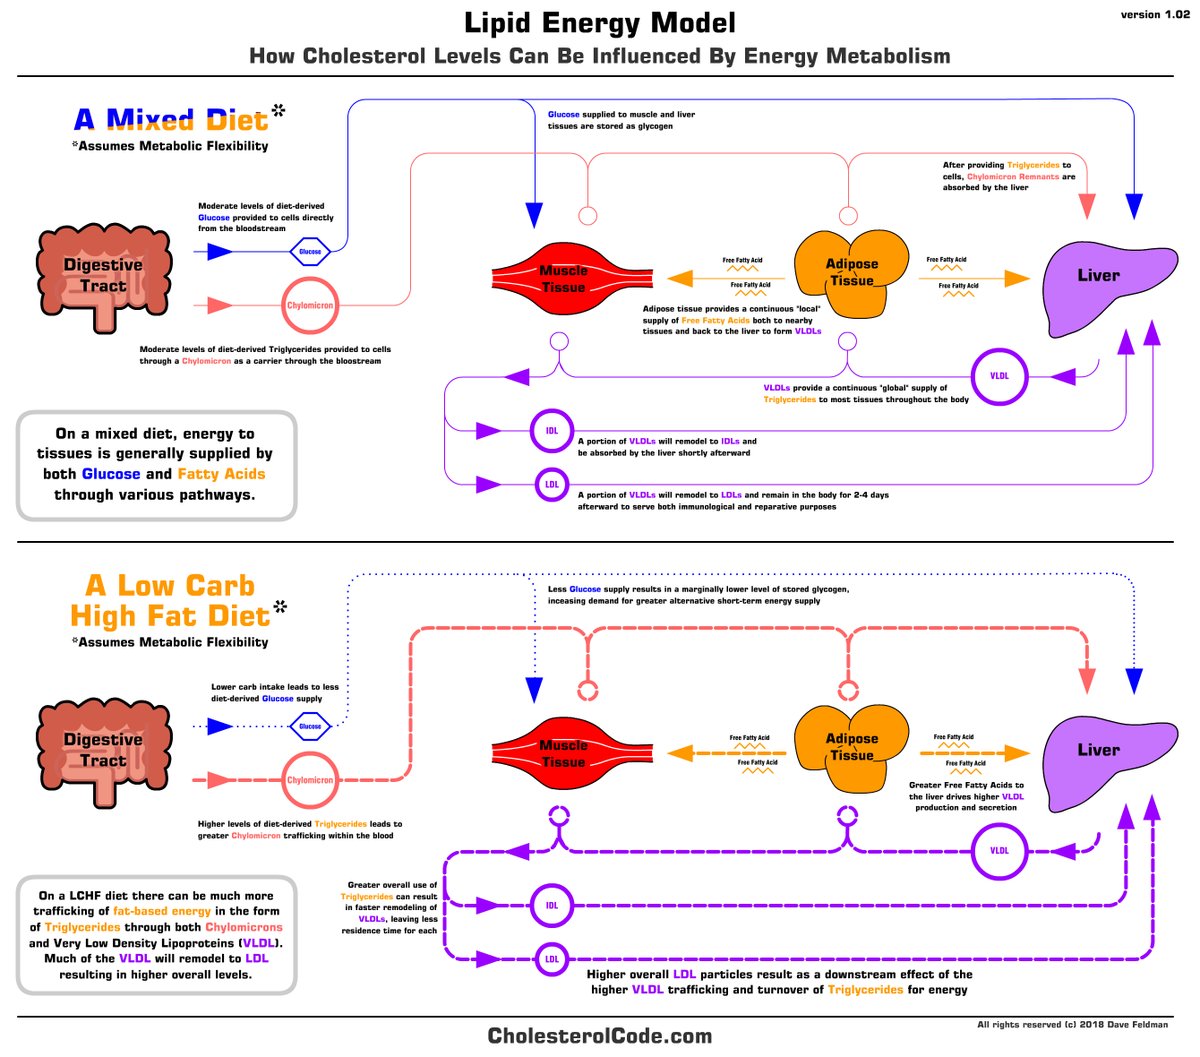 5/ Long story short, this has ultimately led to development of what I call the  #LipidEnergyModel which might help to explain this phenomenon of higher cholesterol when fat adapted, particularly if metabolically healthy.